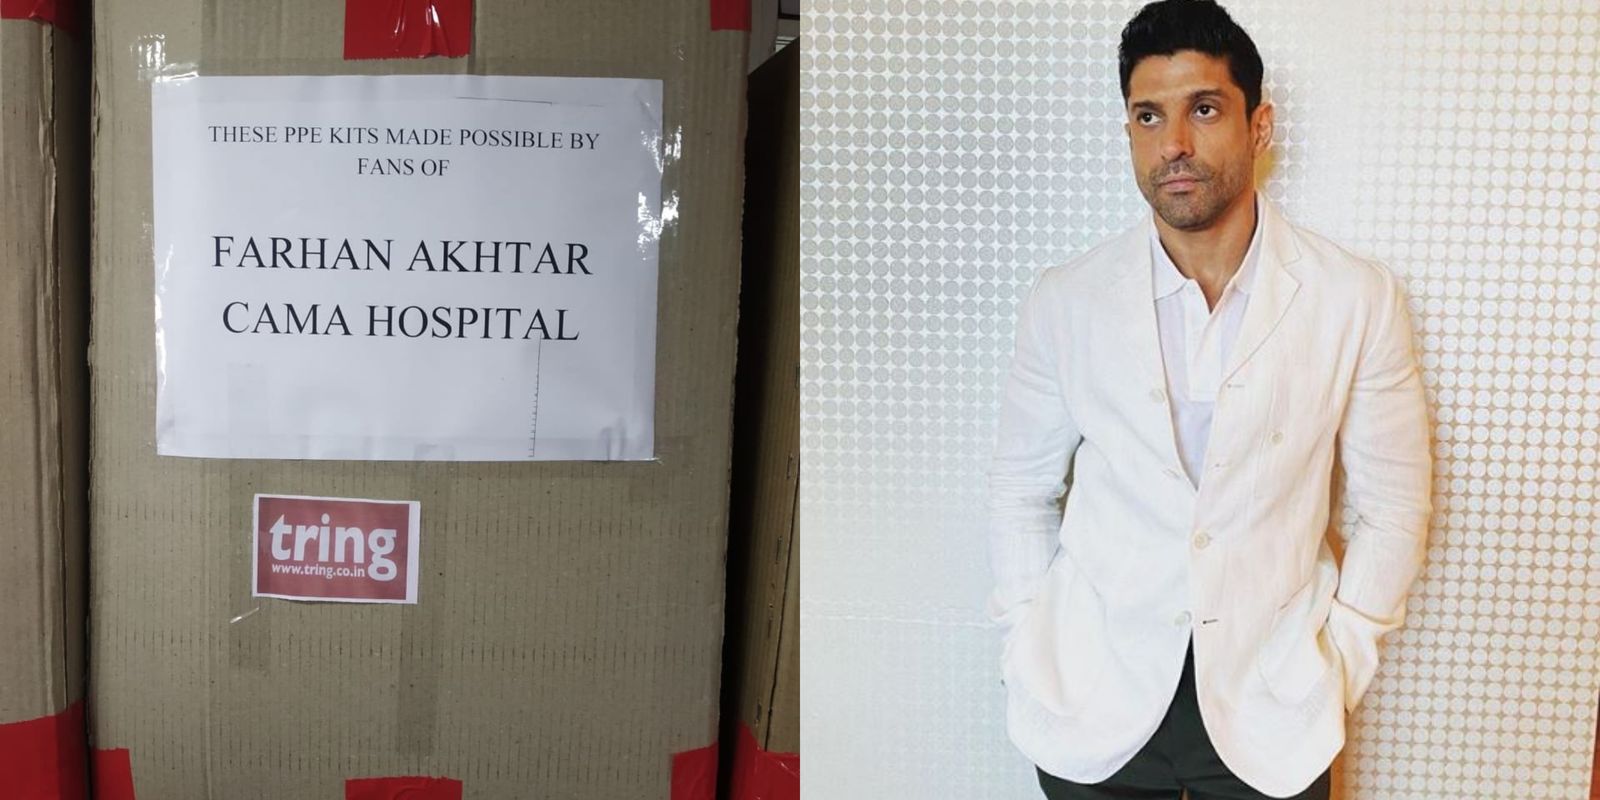 Farhan Akhtar's Charitable Motives Questioned By Users For Putting Name On Donated Kits, Ask 'Shouldn't Help Be Faceless?'